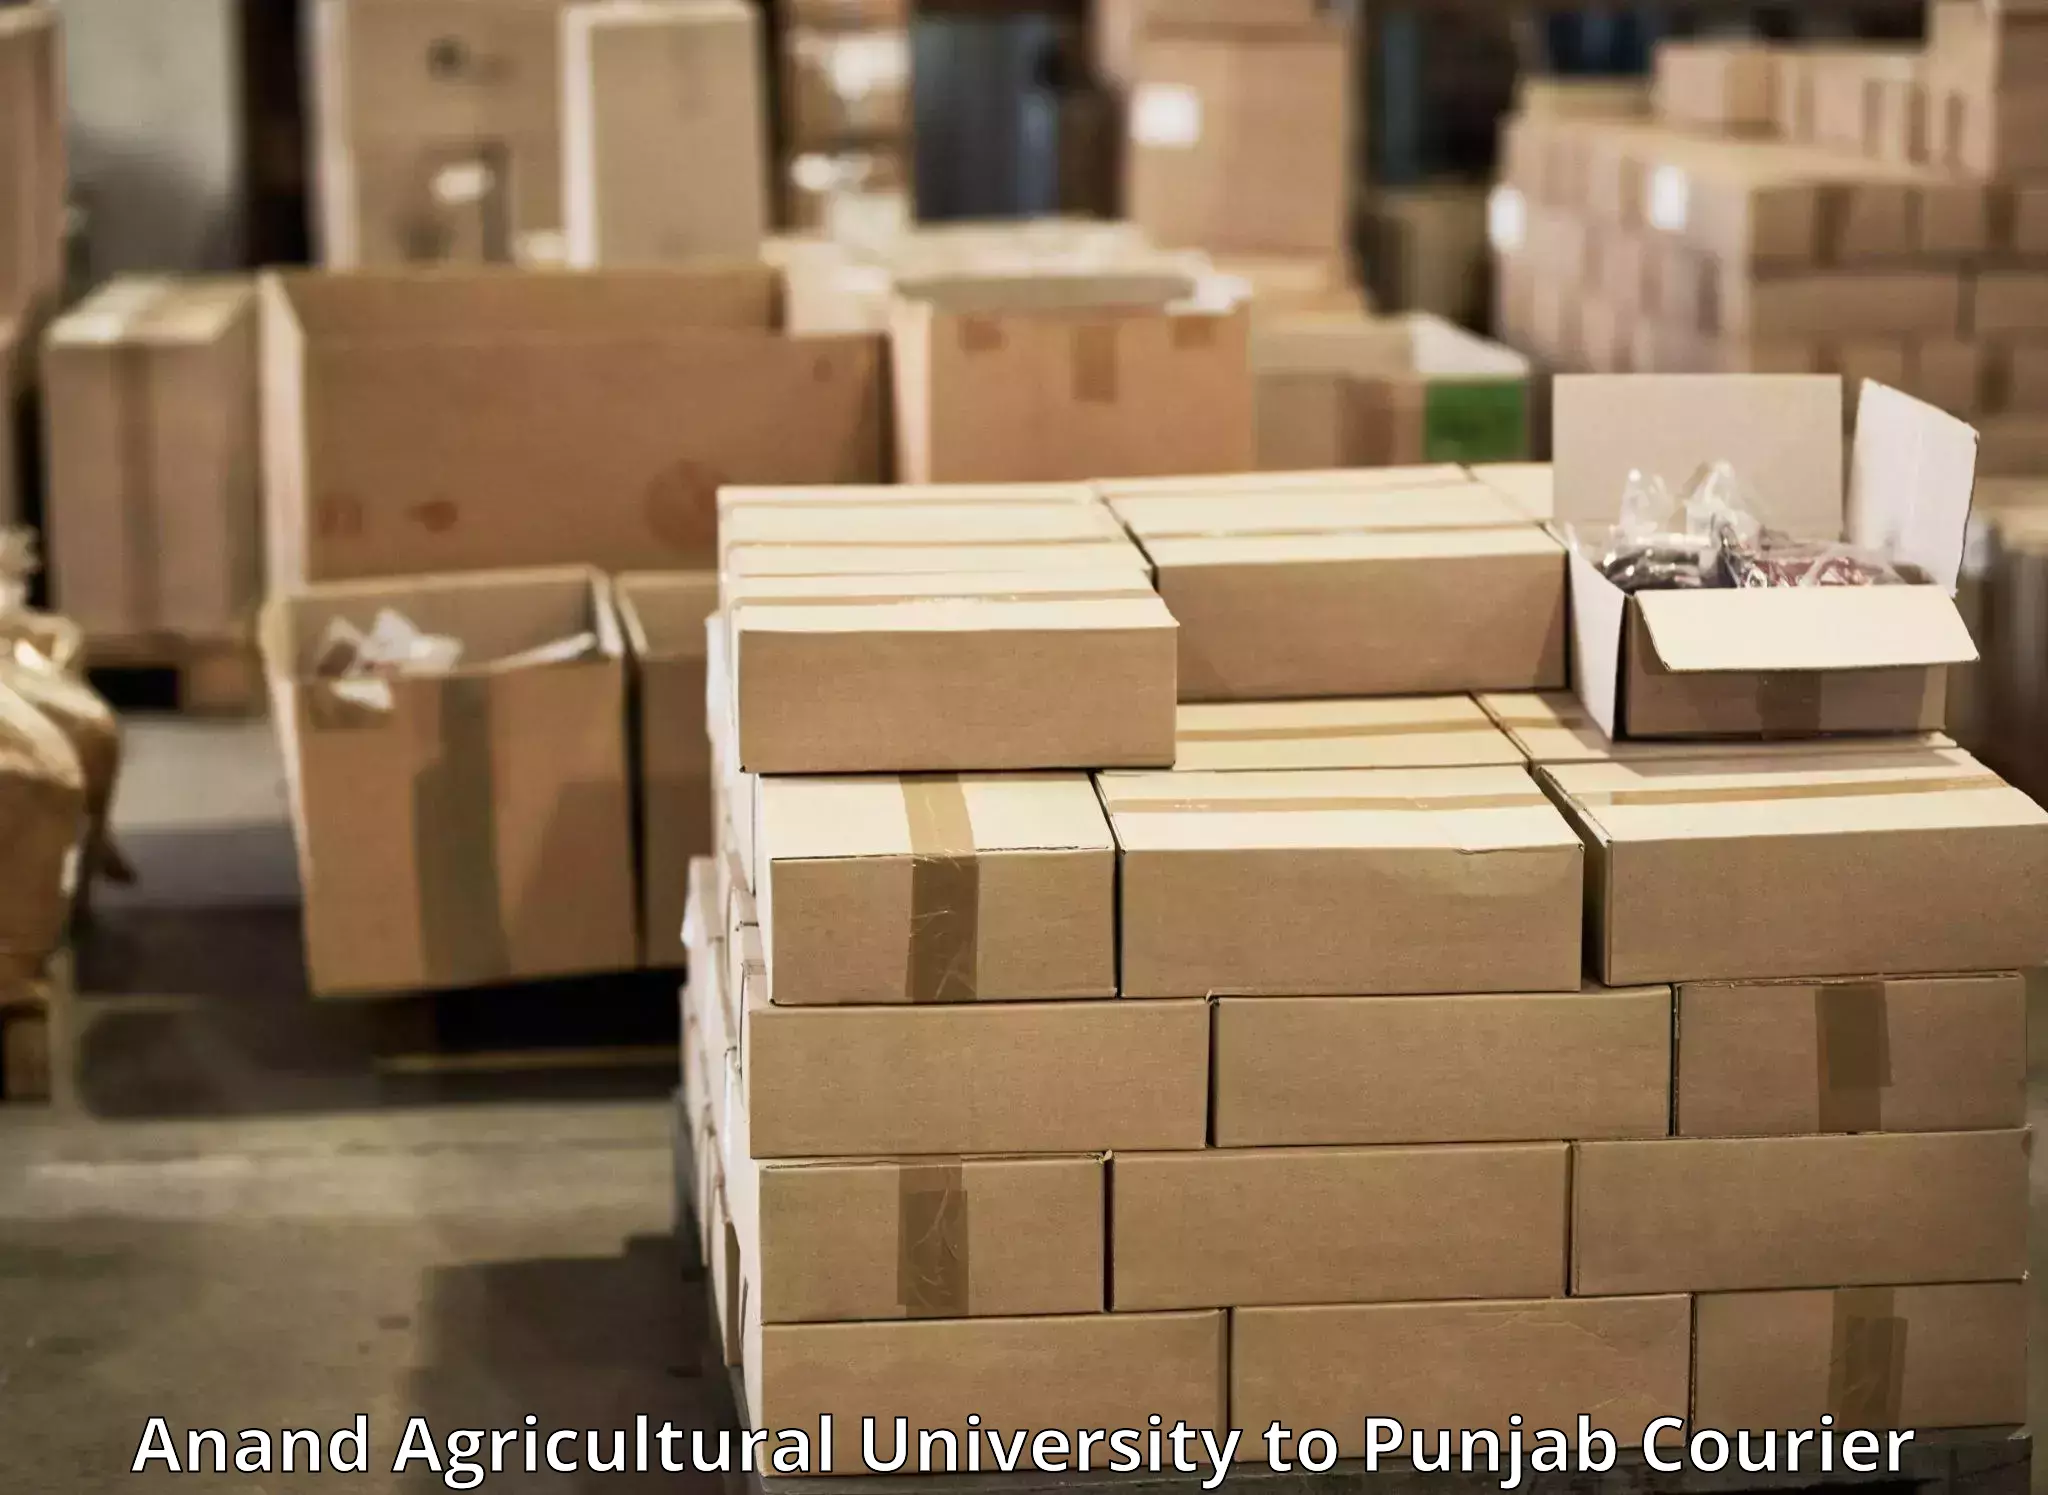 Cash on delivery service Anand Agricultural University to Begowal